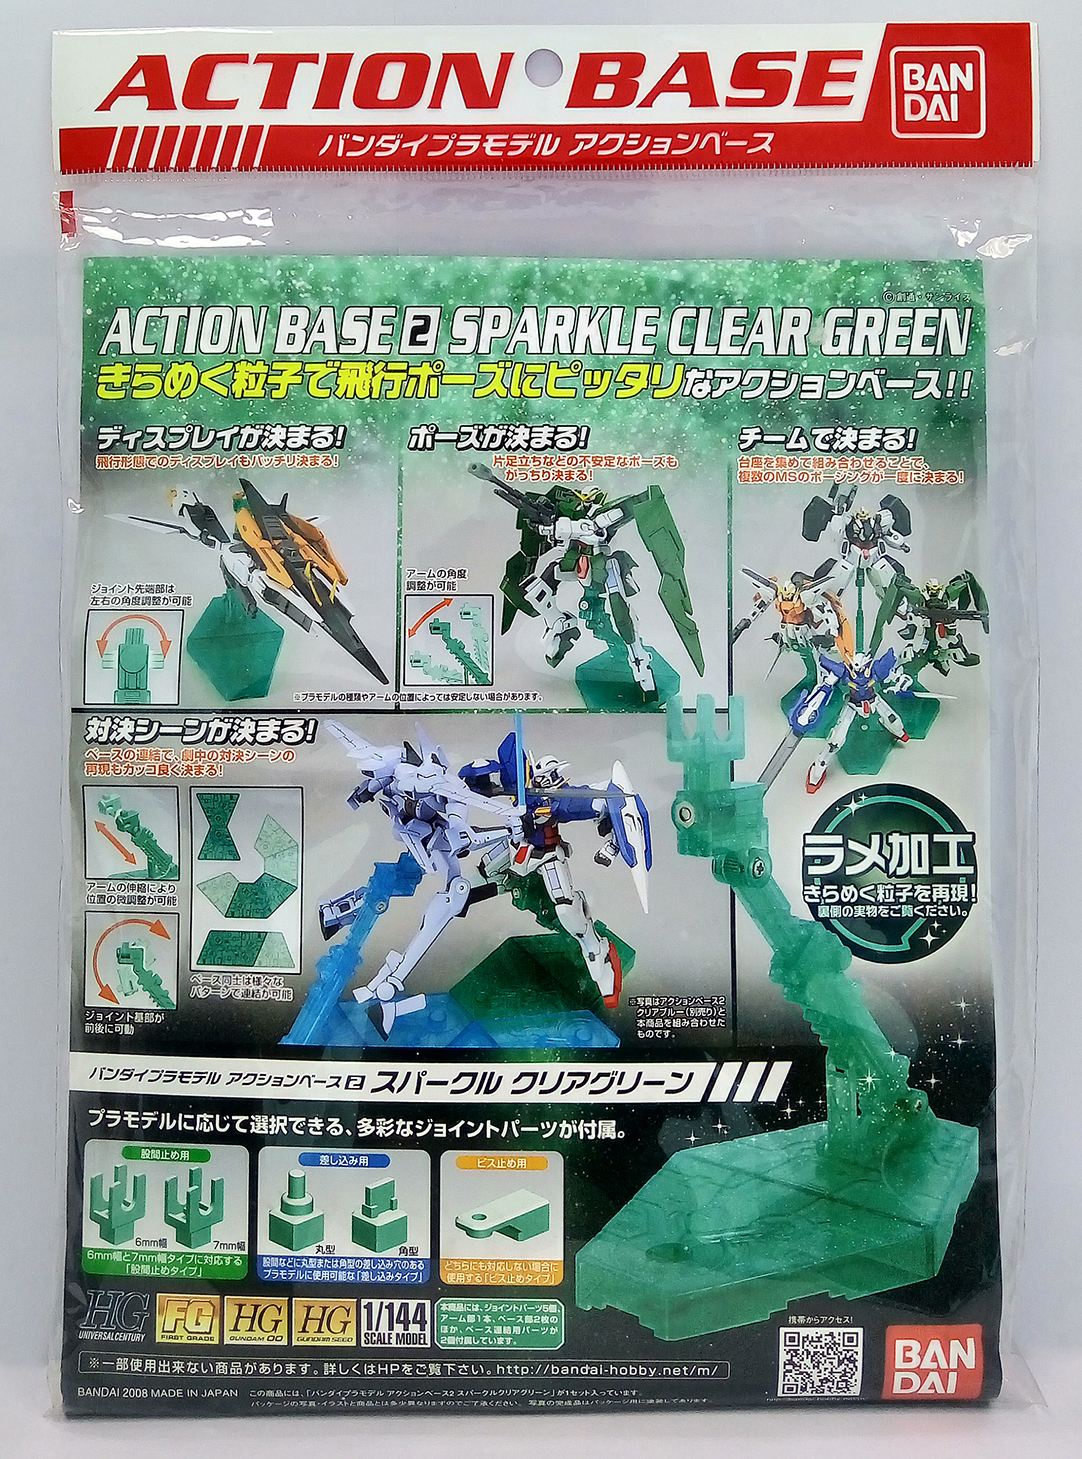 ACTION BASE 2 Sparkle Clear Green